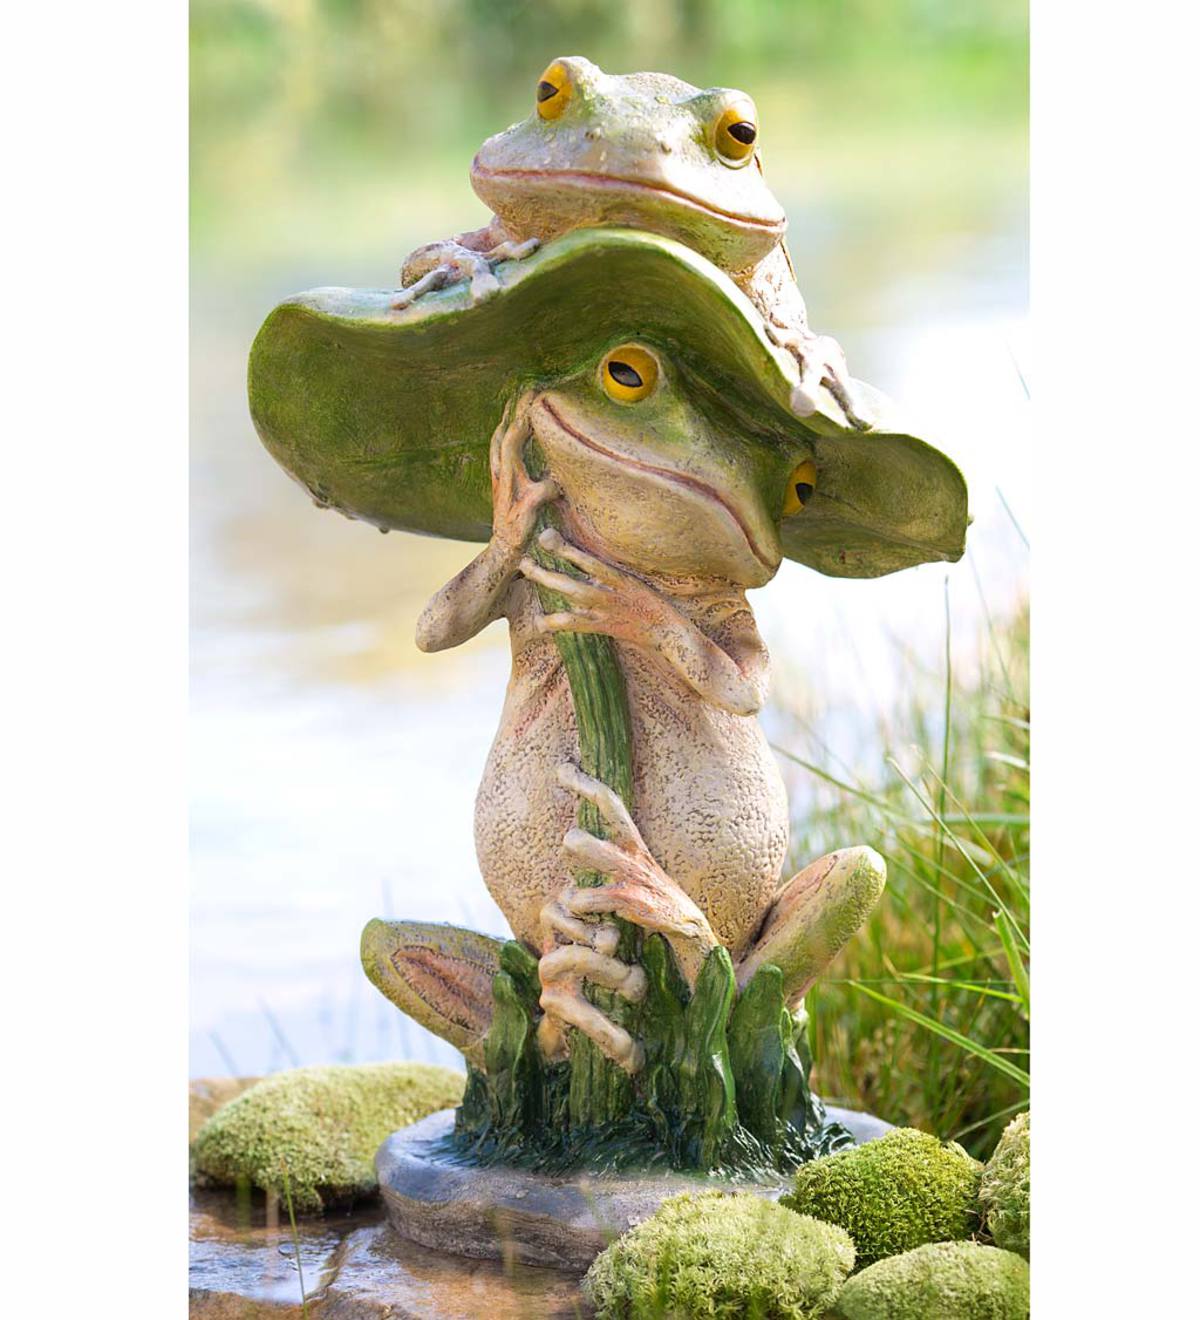 Two Frogs with Toadstool Garden Sculpture